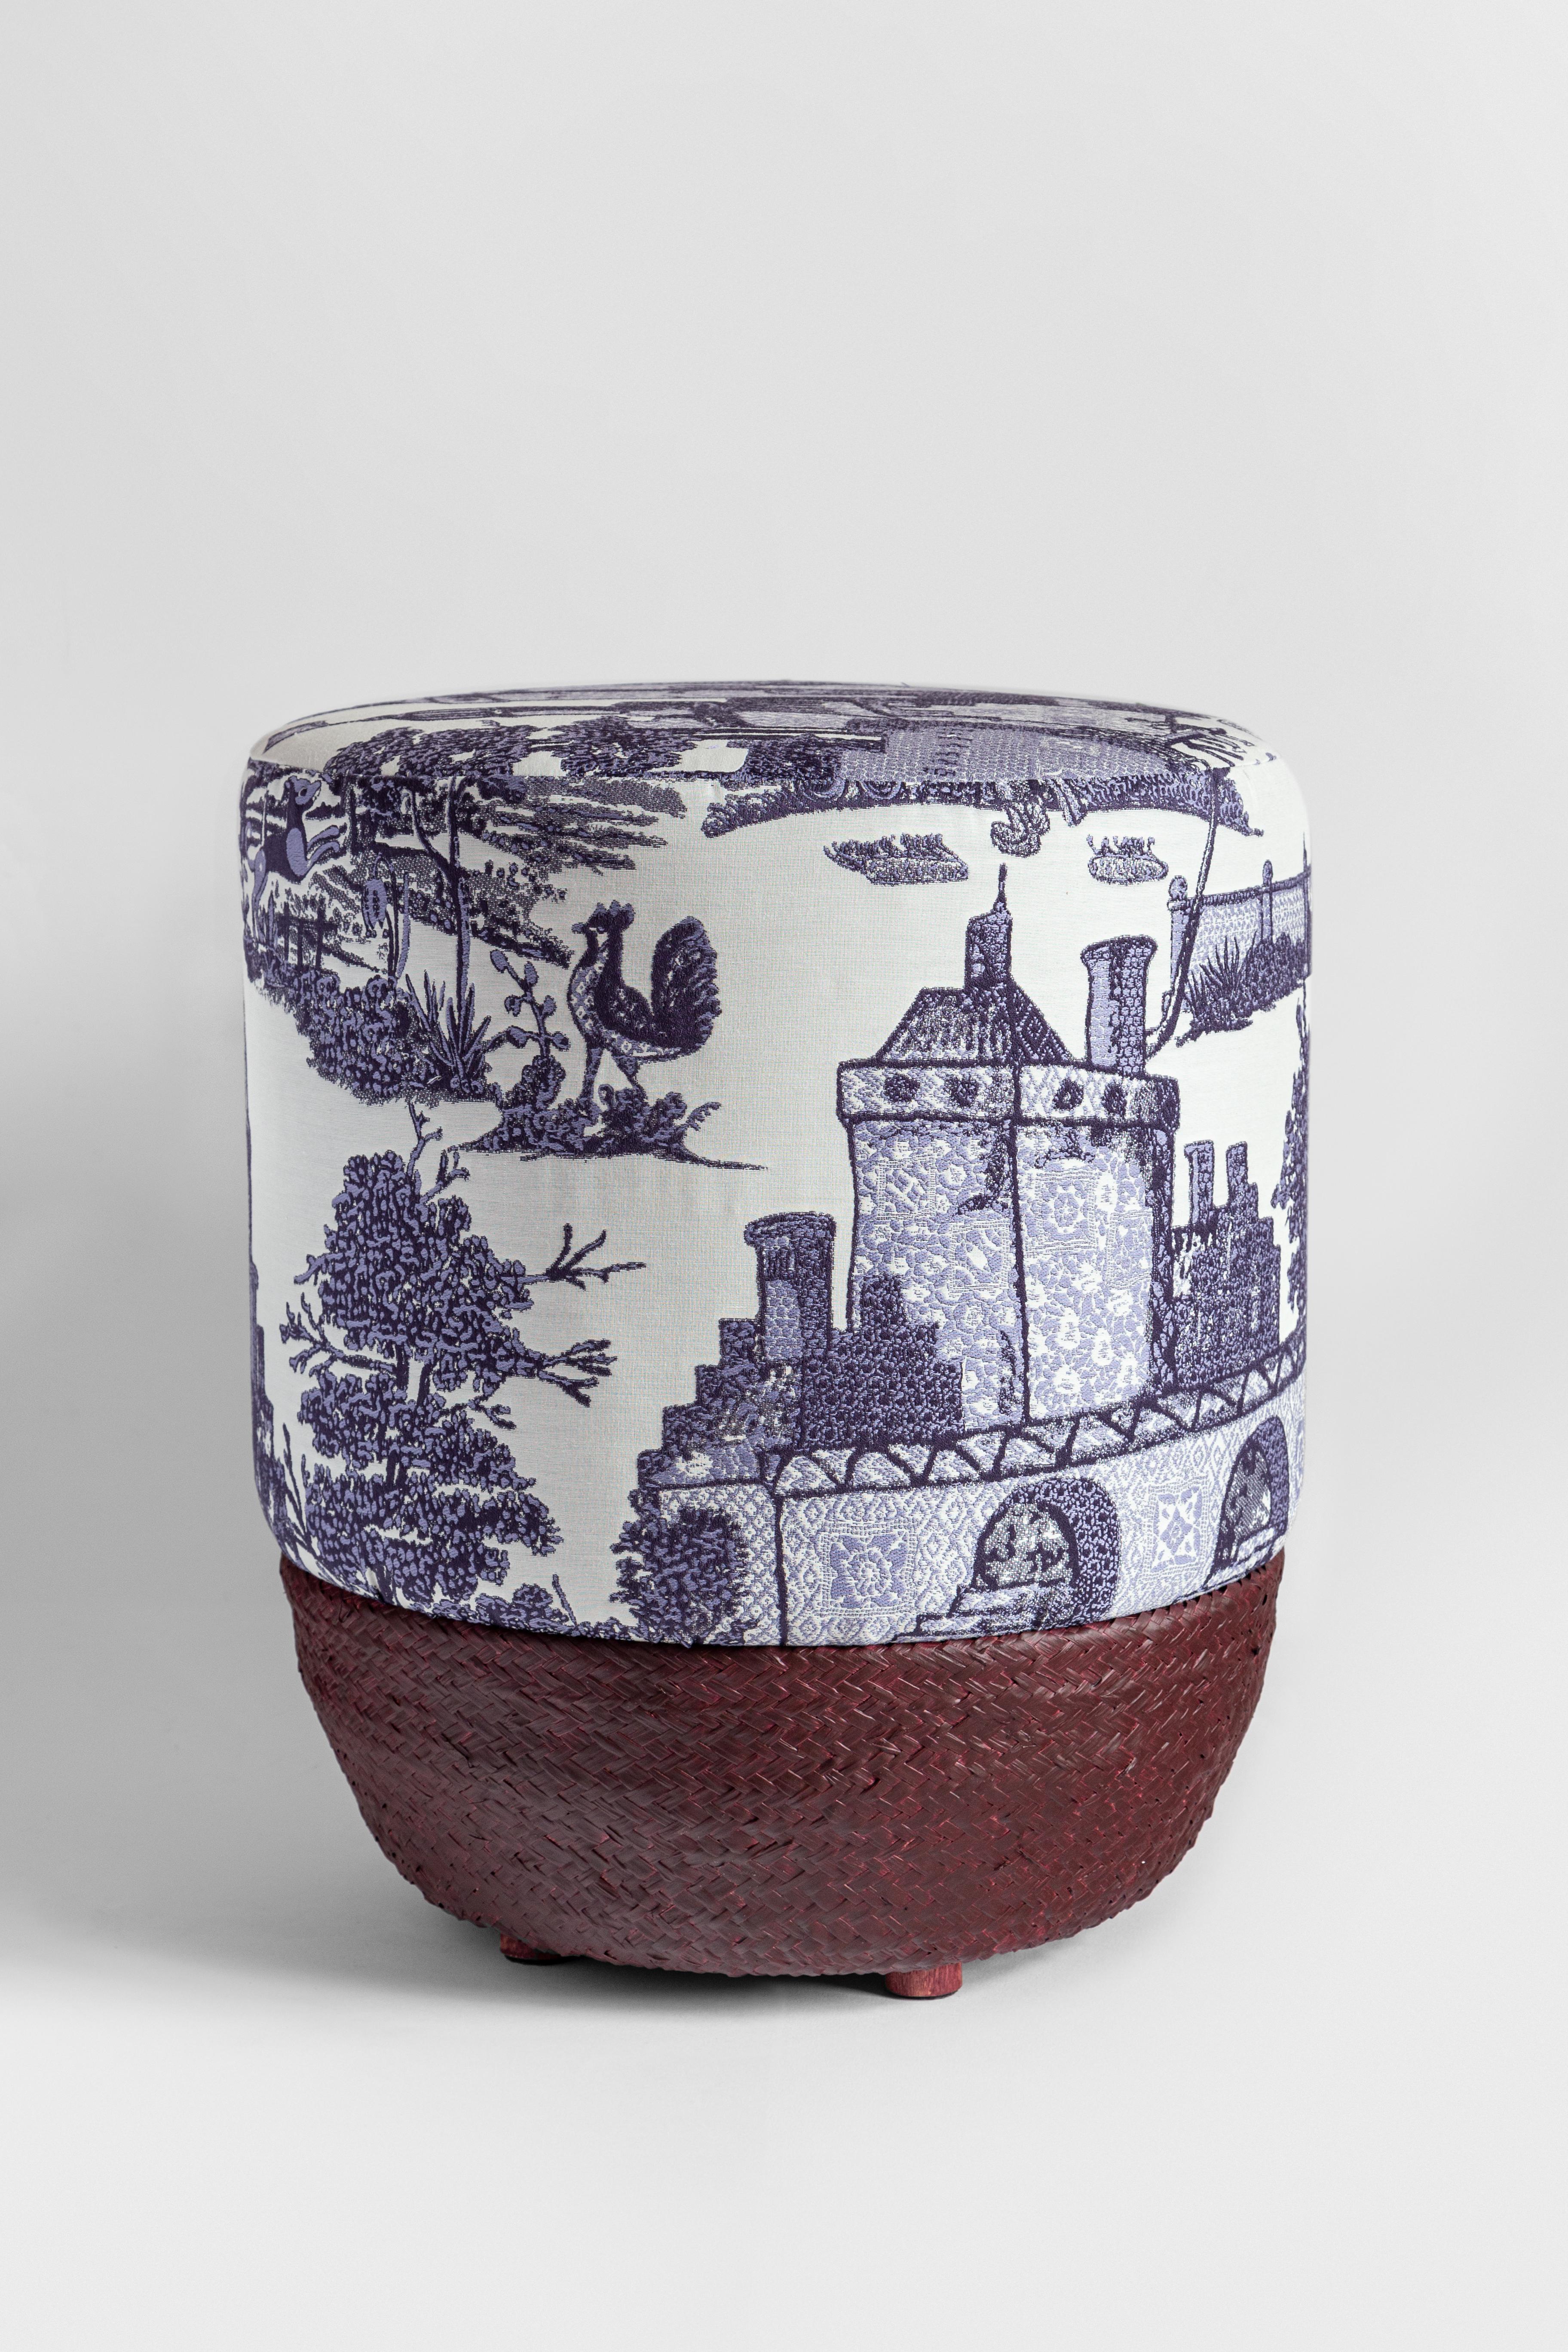 This pouf with blue and white tones is characterized by rich decorations, inspired by the decor typical of eighteenth-century Dutch porcelains. The minute details portray an array of simple, daily life situations. Many different textures and